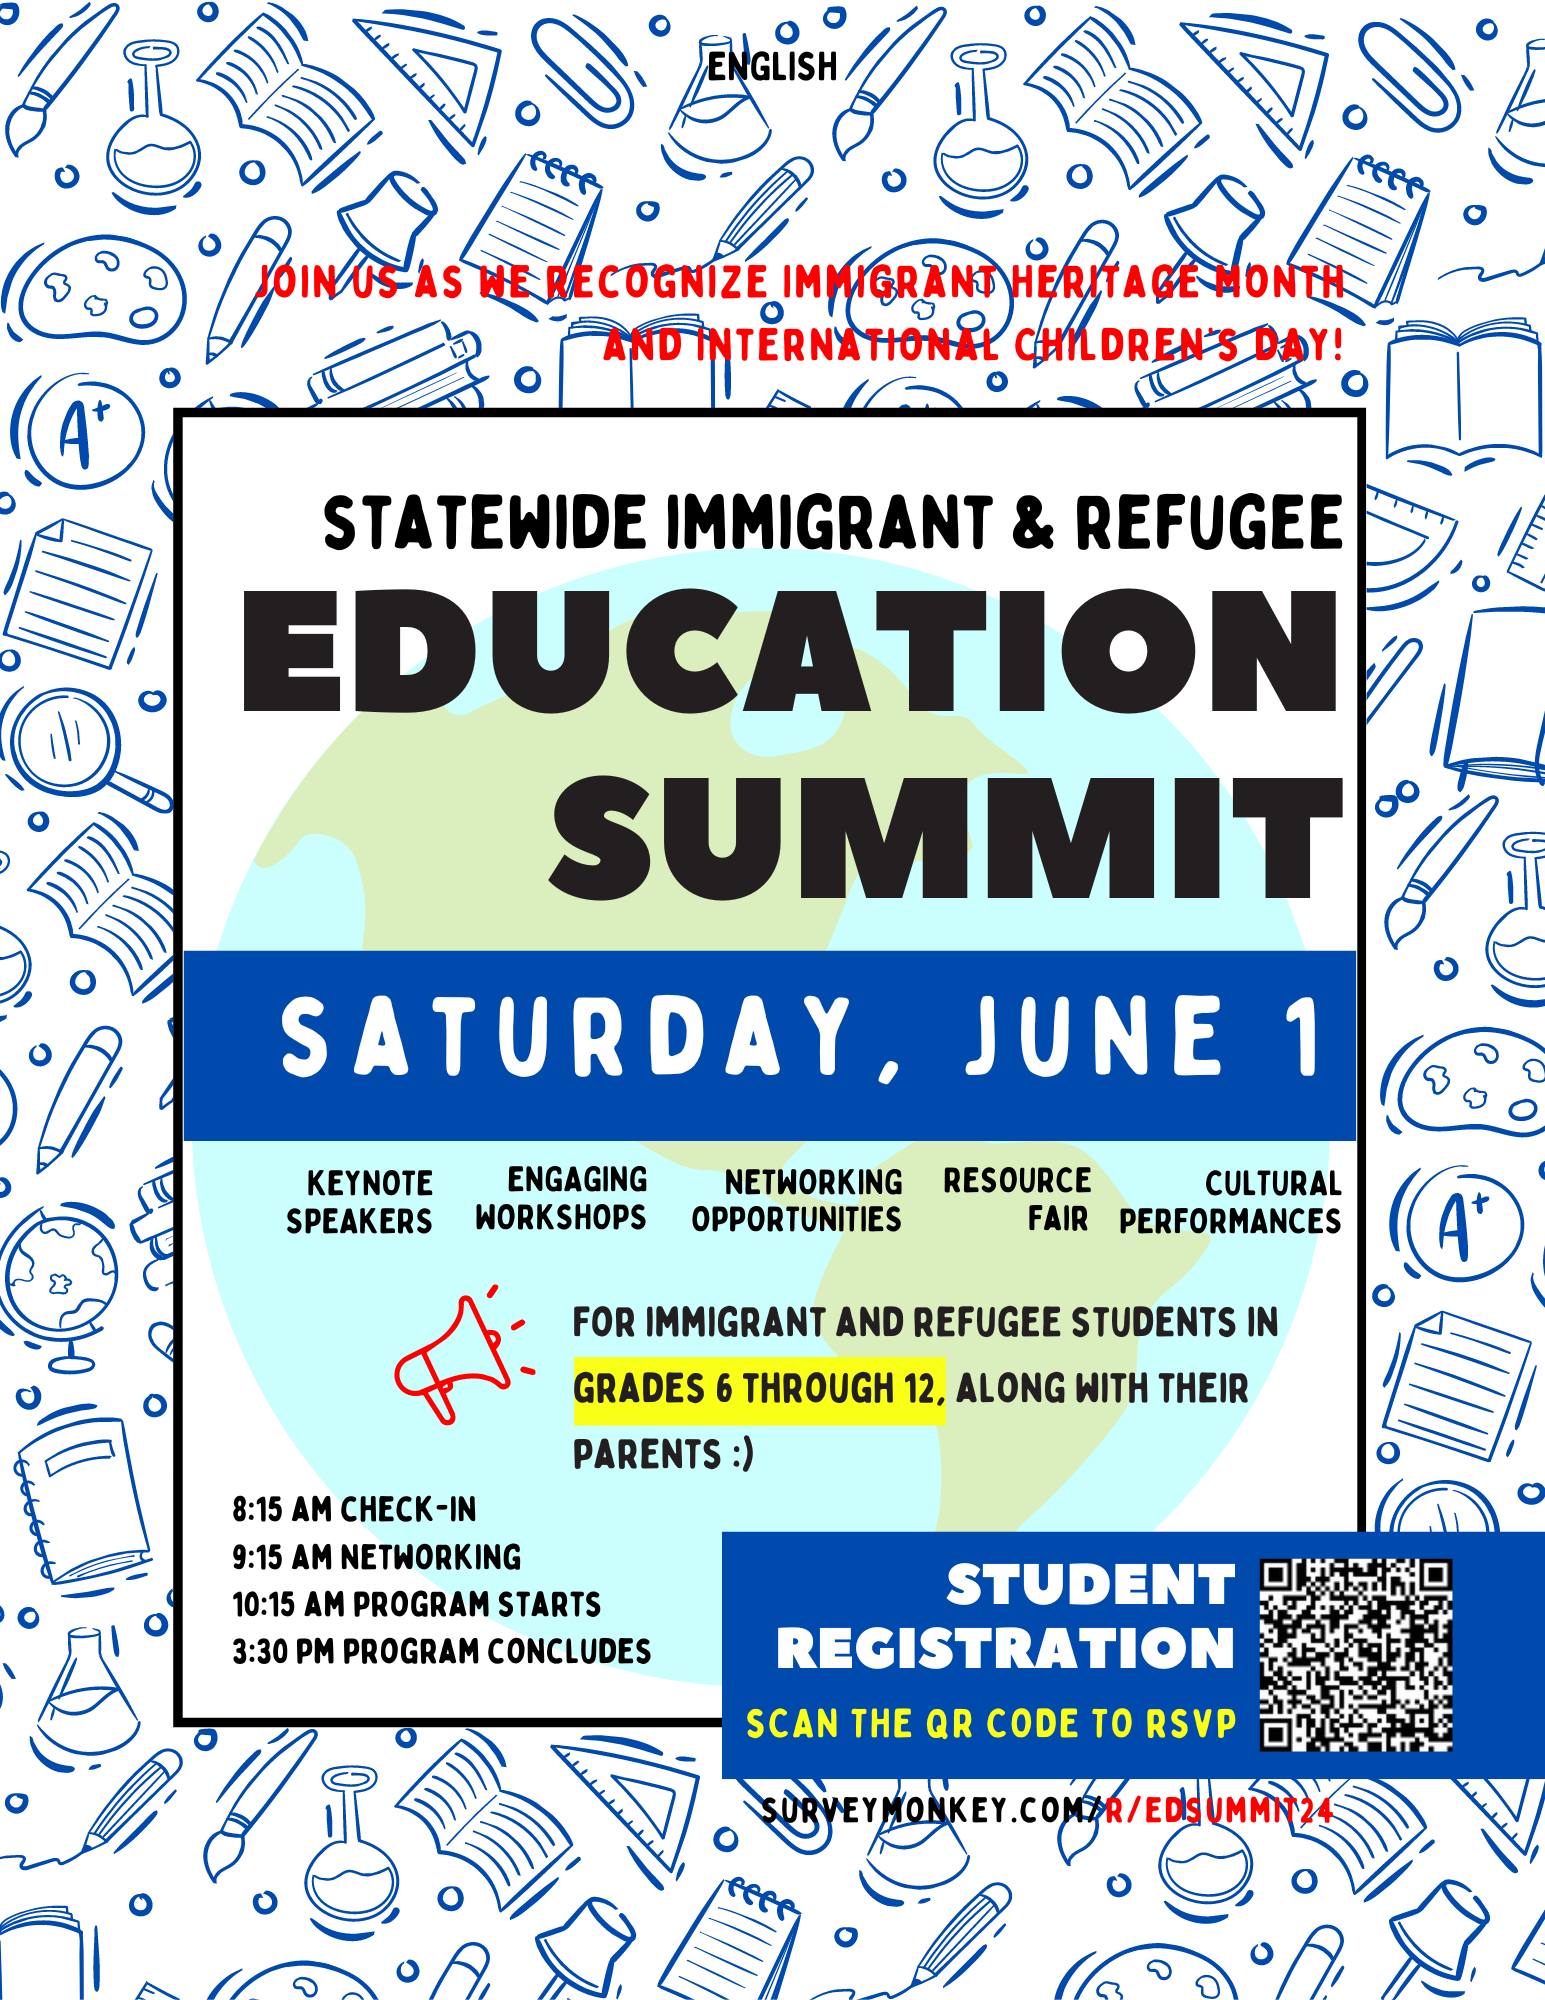 Statewide Immigrant & Refugee Education Summit